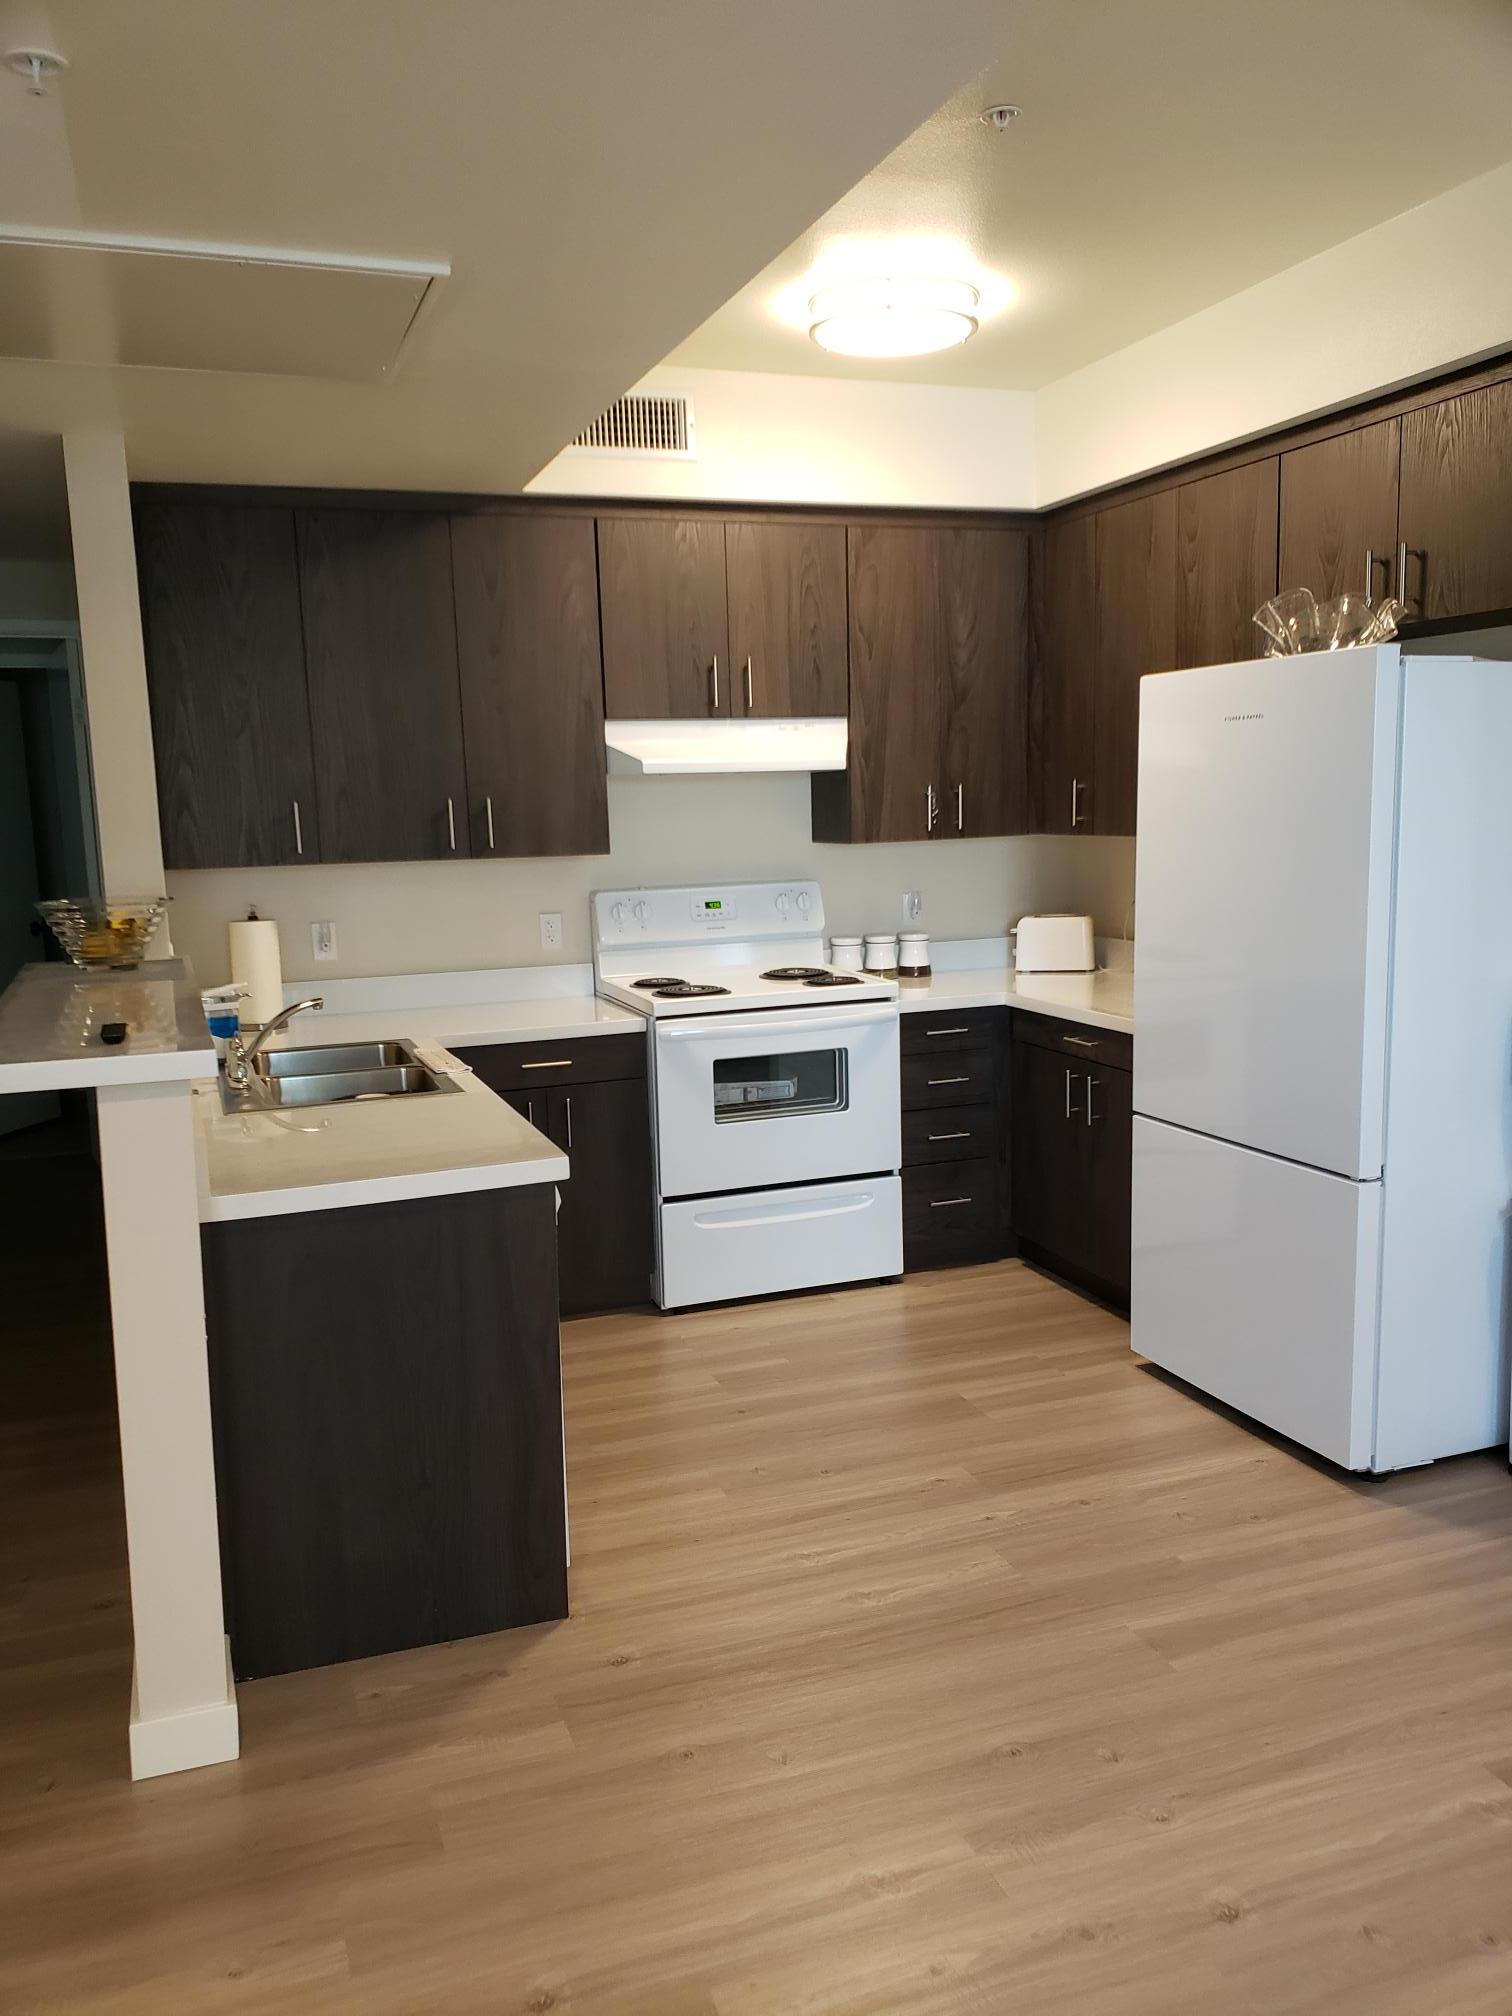 Coronel Apartments unit kitchen. U shape kitchen with dark colored upper and lower cabinets. Full range stove and fridge appliances. Kitchen floors are wood like plants in a light brown tan color.